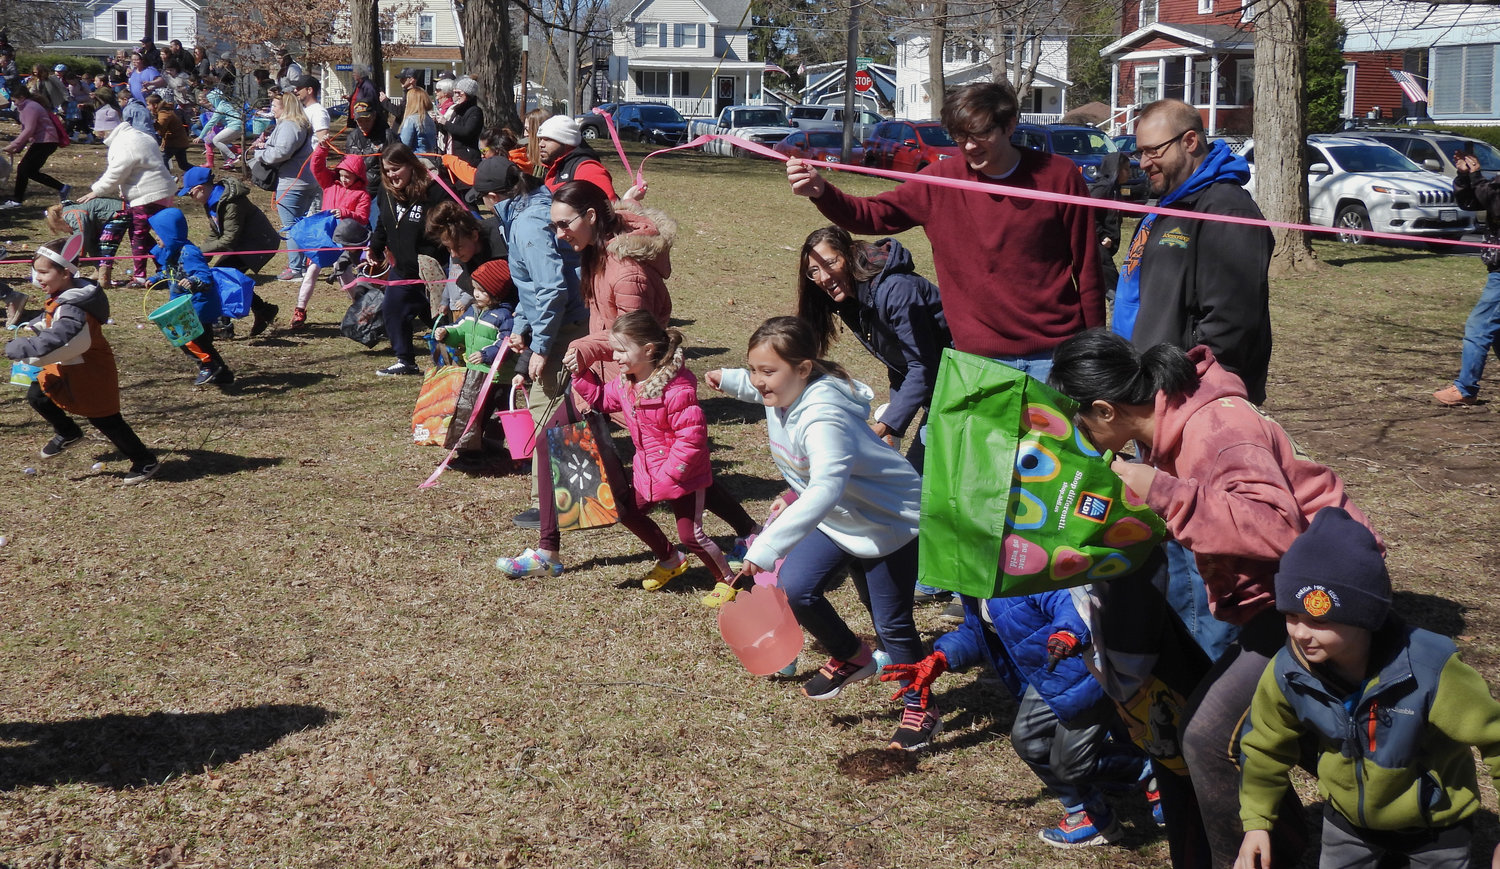 The annual Oneida Easter Egg Hunt saw kids of all ages in Allen Park filling their bags and baskets with eggs on Saturday, April 8 in Oneida. Pictured are kids running off to start their egg hunt.